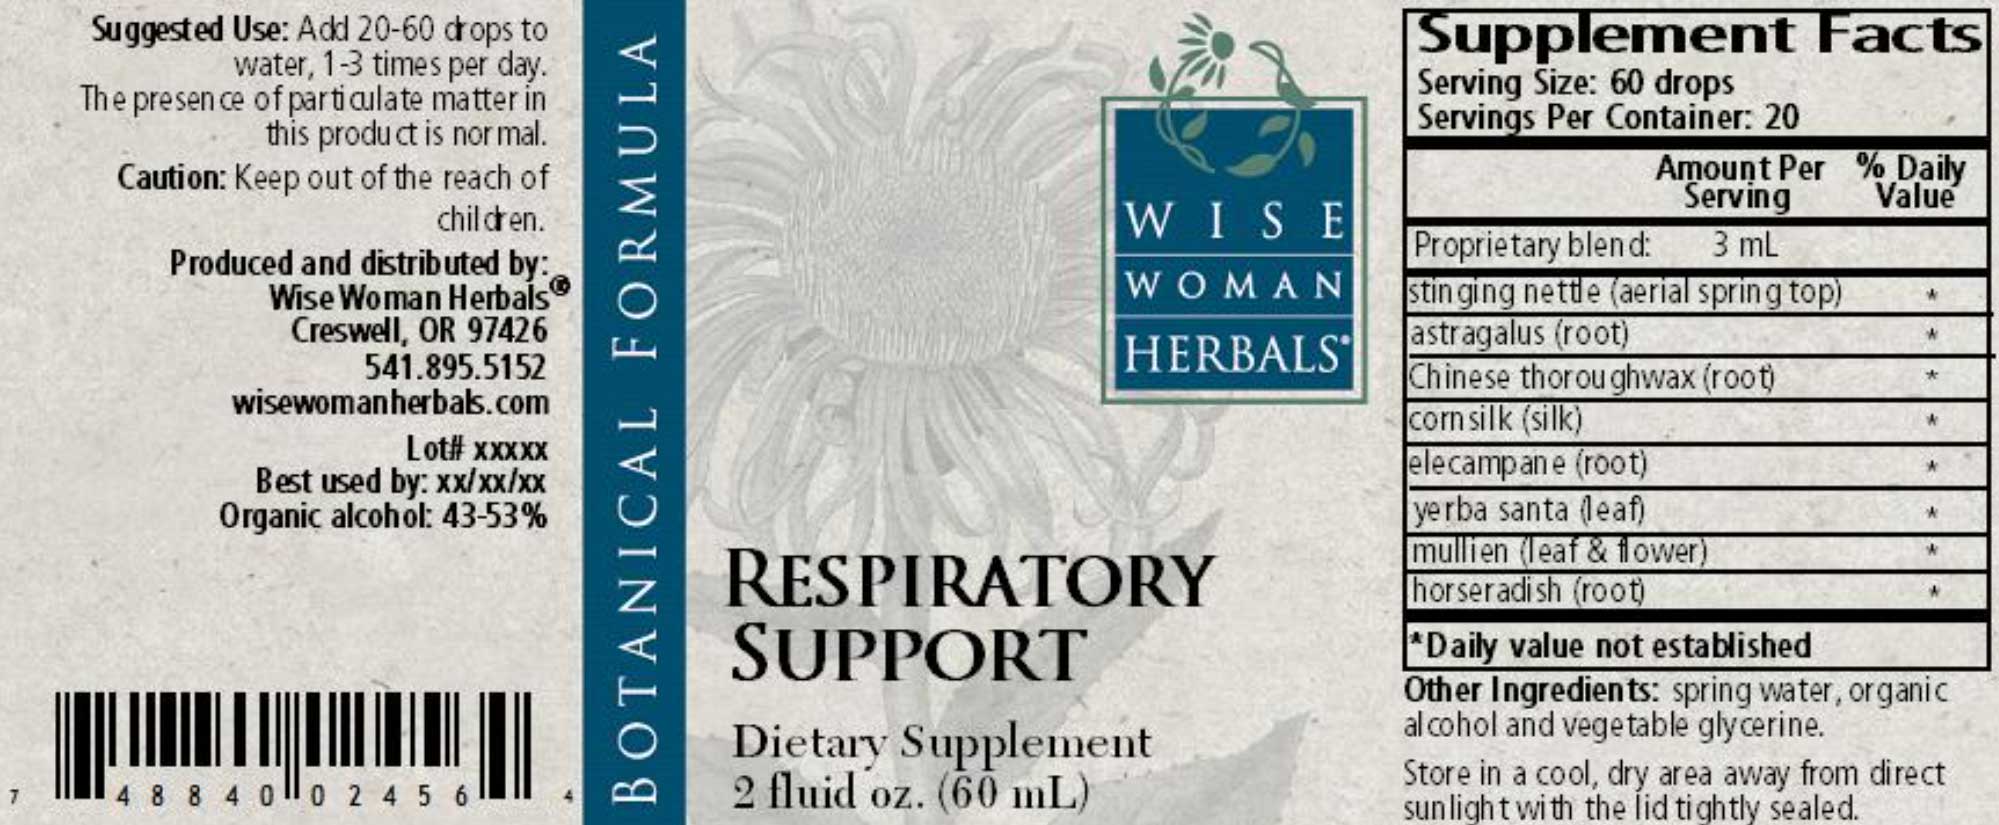 Wise Woman Herbals Respiratory Support Label